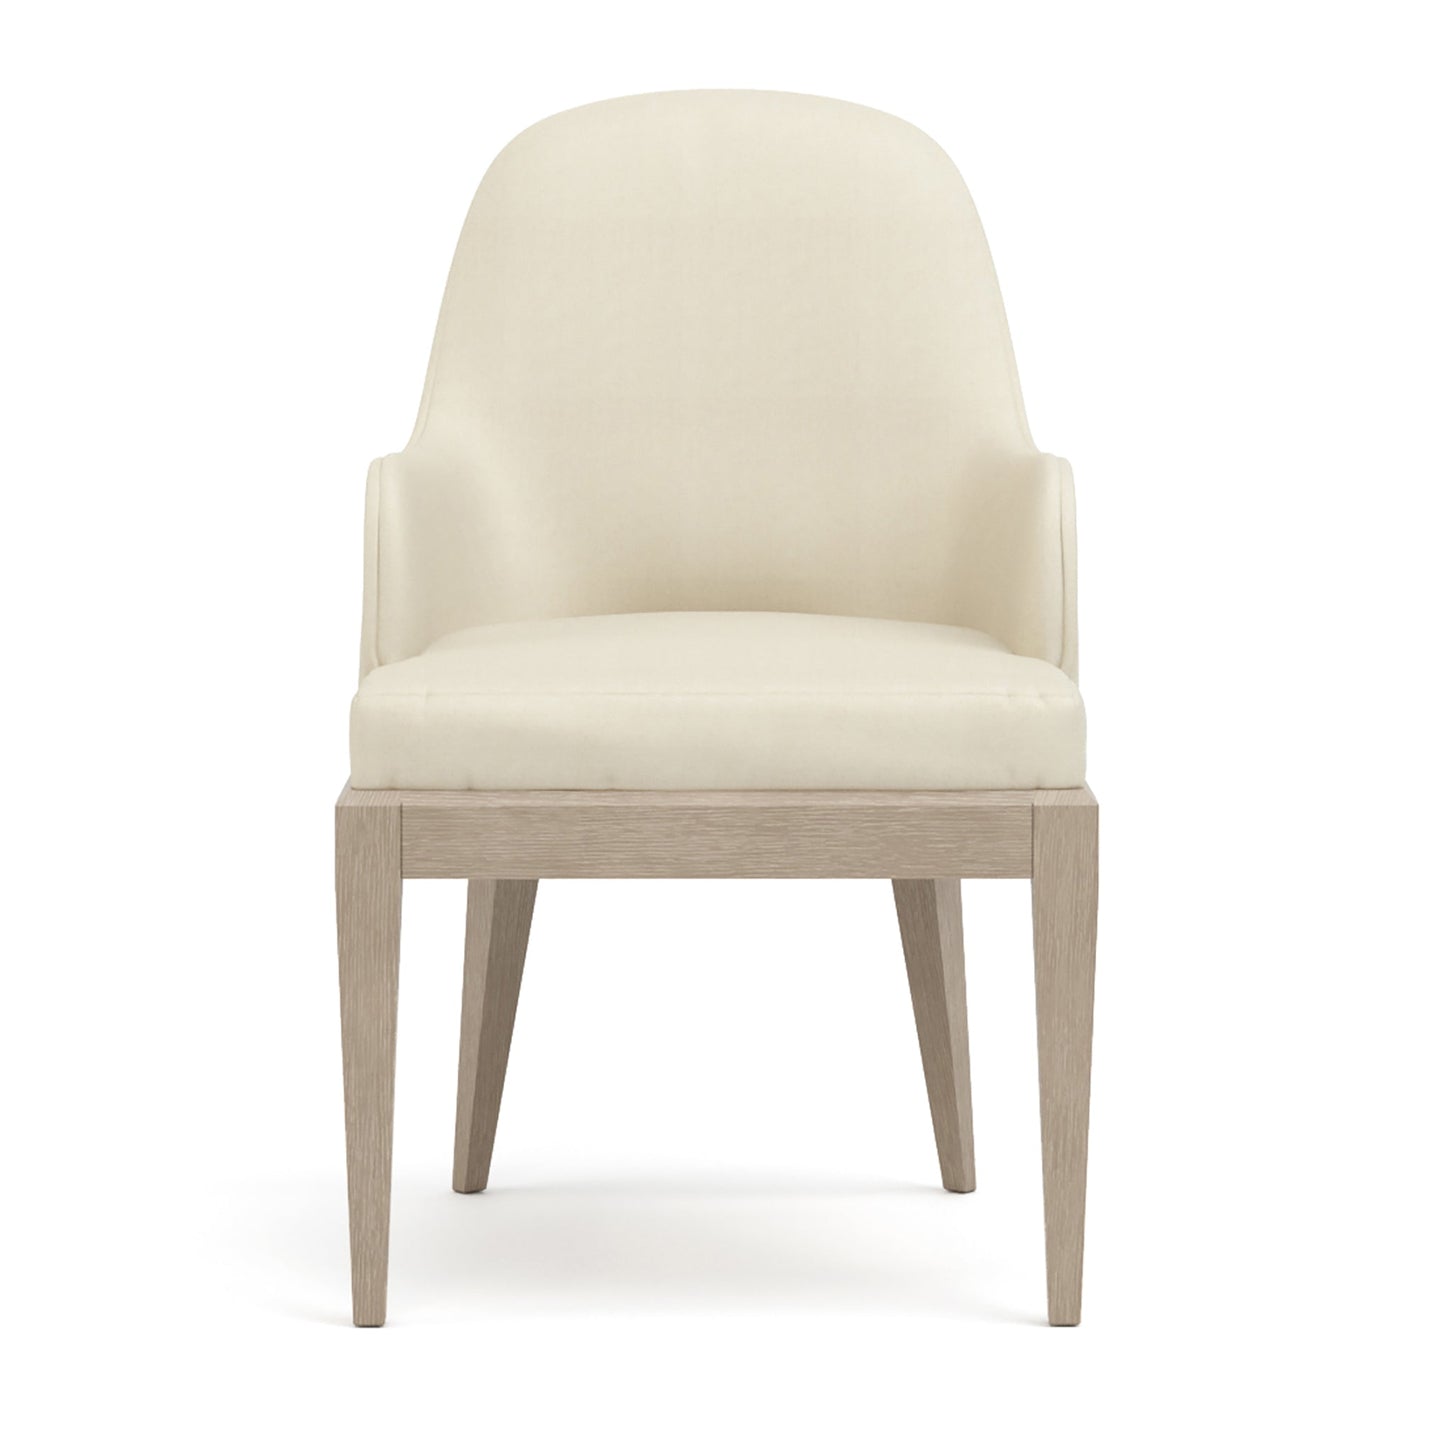 Maidstone Upholstered Arm Chair in 201 Sandbank finish